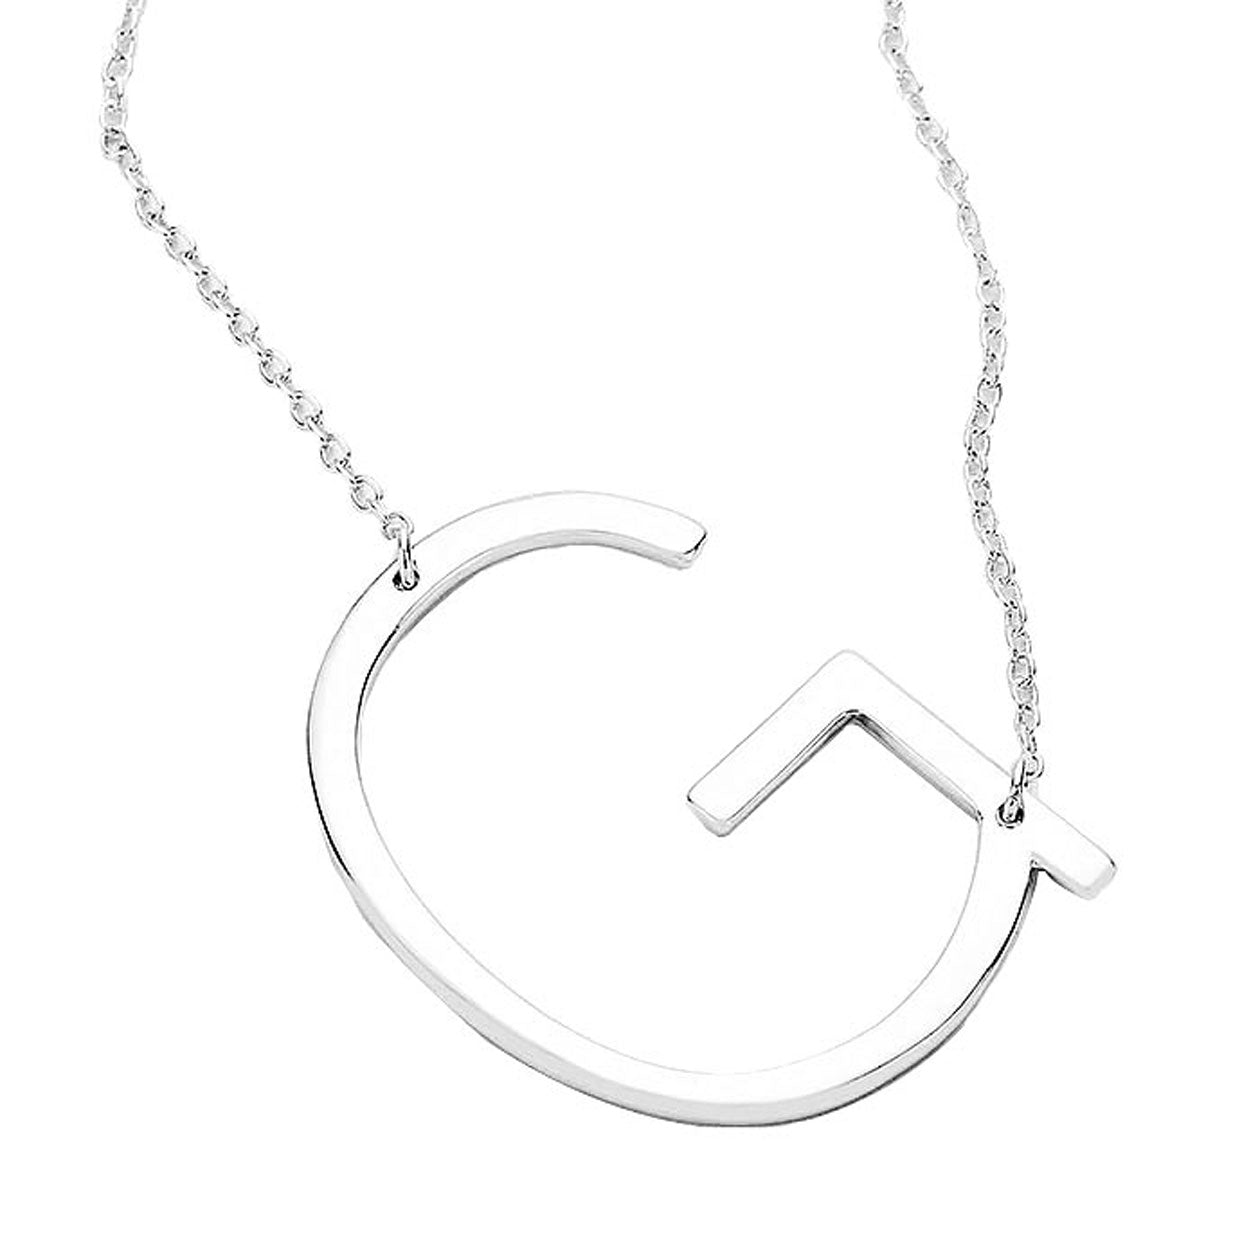 Silver G Monogram Metal Pendant Necklace. Beautifully crafted design adds a gorgeous glow to any outfit. Jewelry that fits your lifestyle! Perfect Birthday Gift, Anniversary Gift, Mother's Day Gift